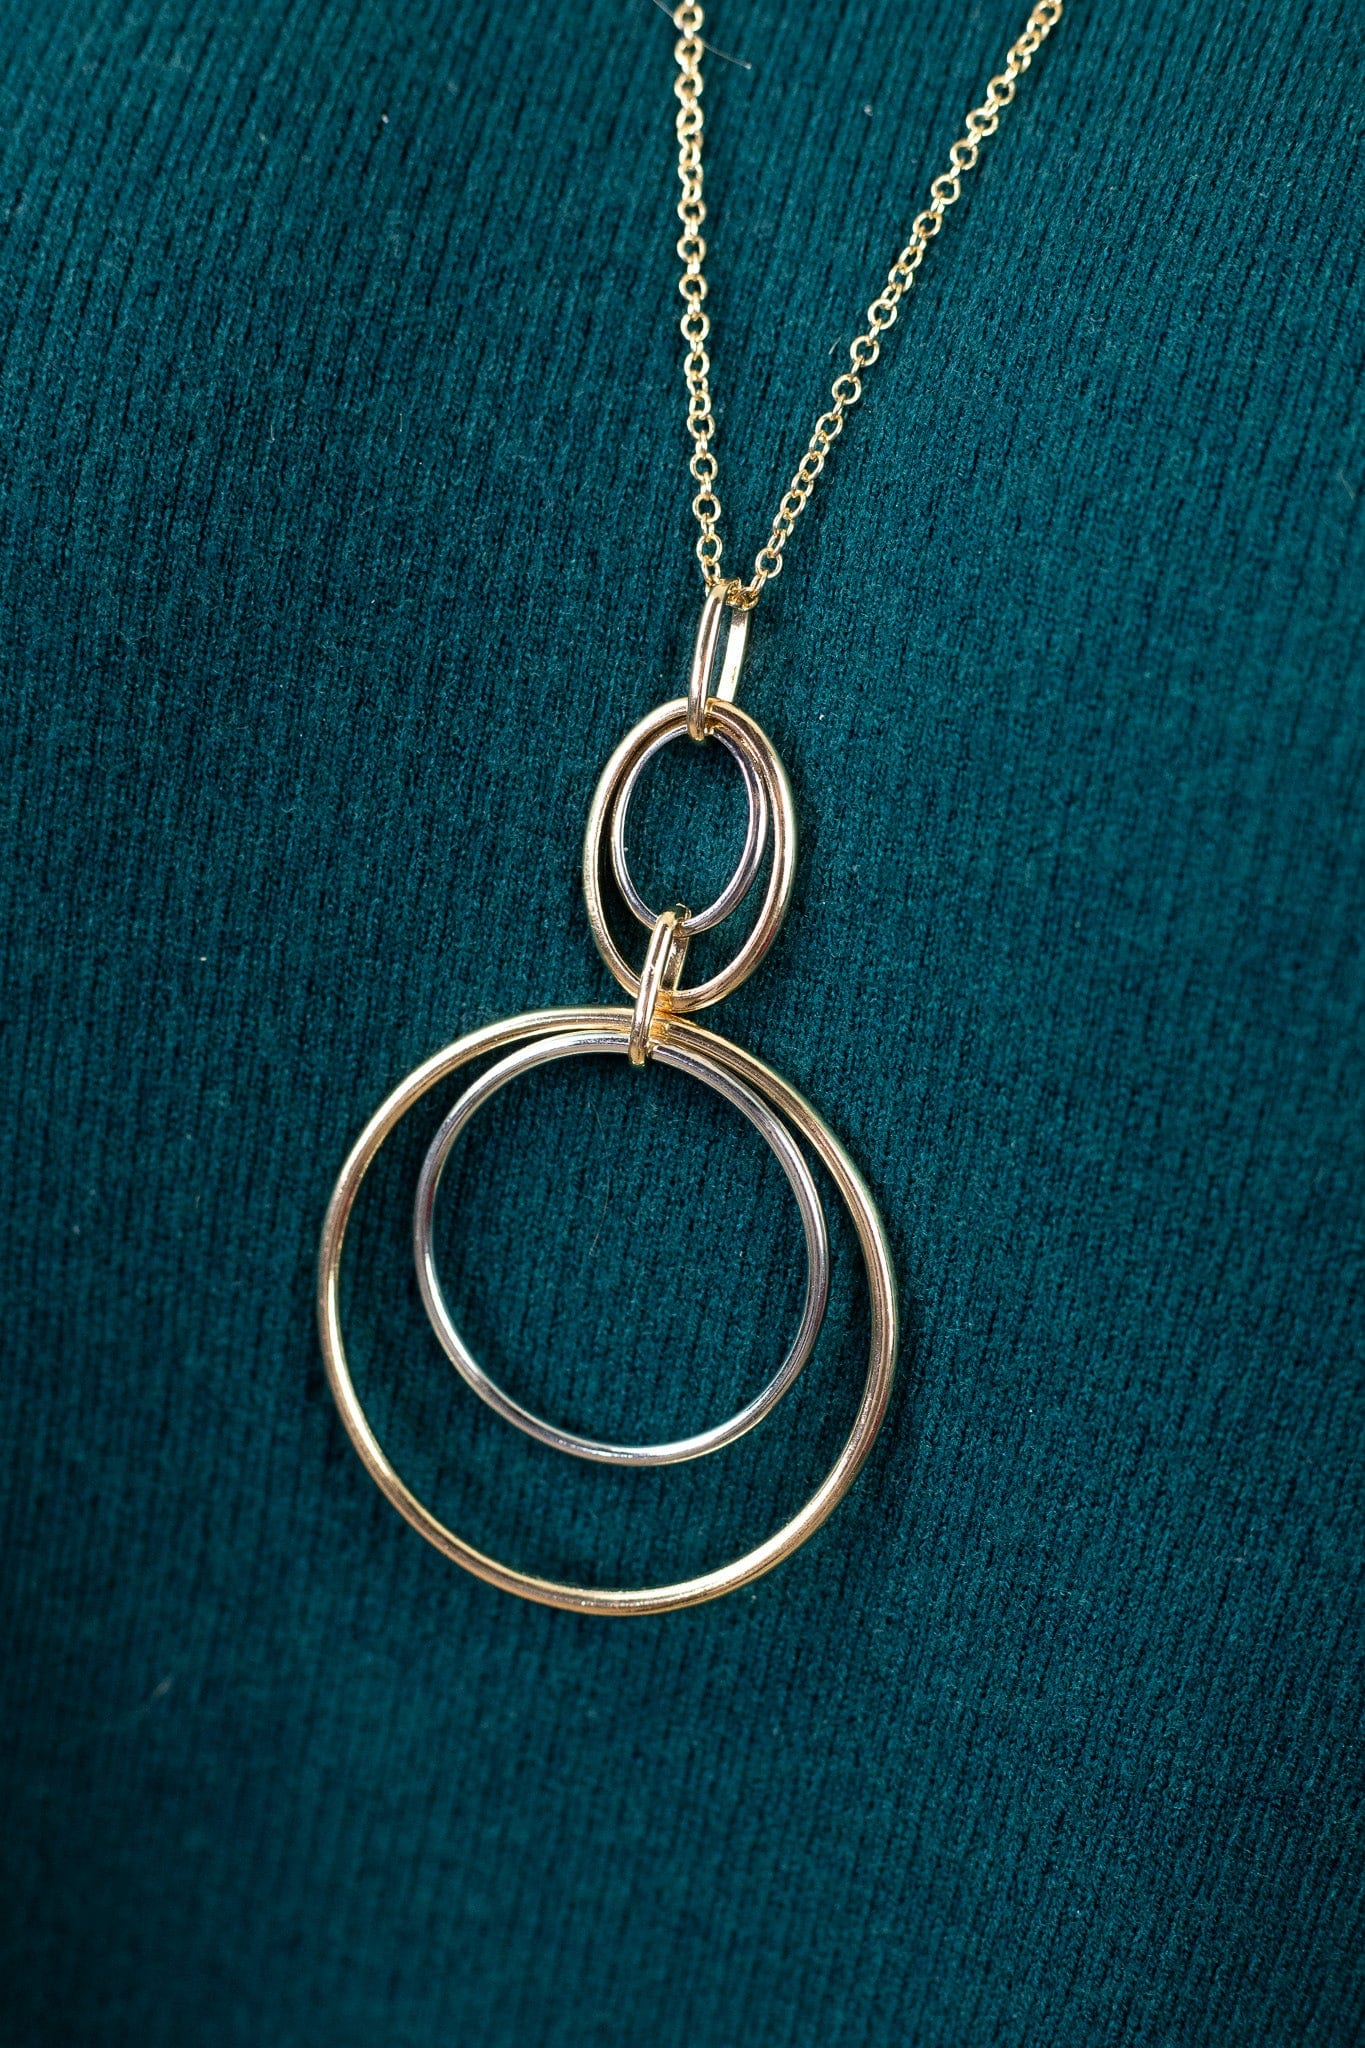 Gold W/ Silver Round Dangle Necklace